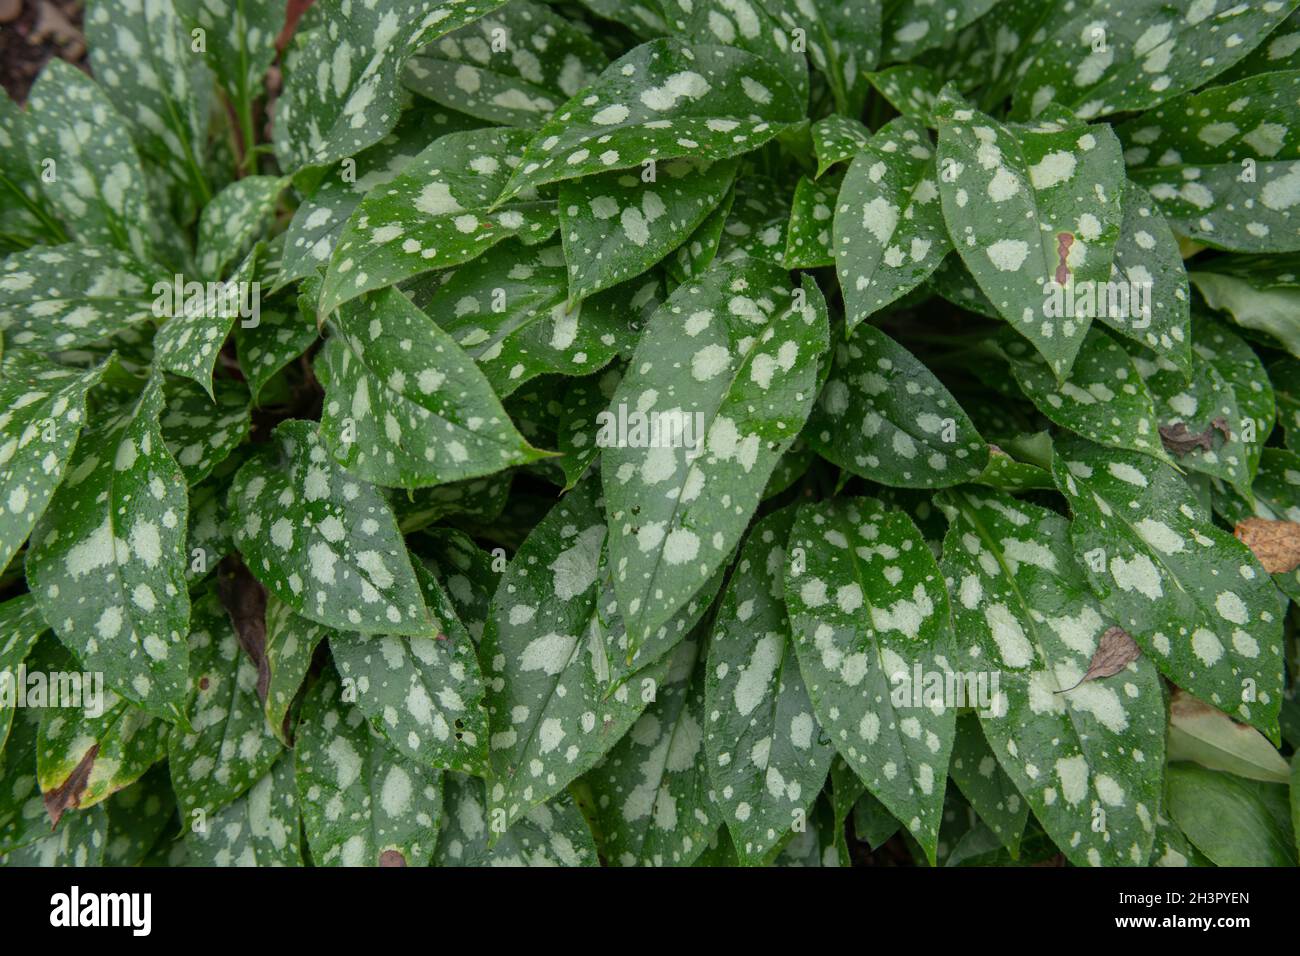 Background or Texture of the Mottled Green and White Autumn Leaves on a Lungwort Plant (Pulmonaria 'Shrimps on the Barbie') Growing in a Garden Stock Photo